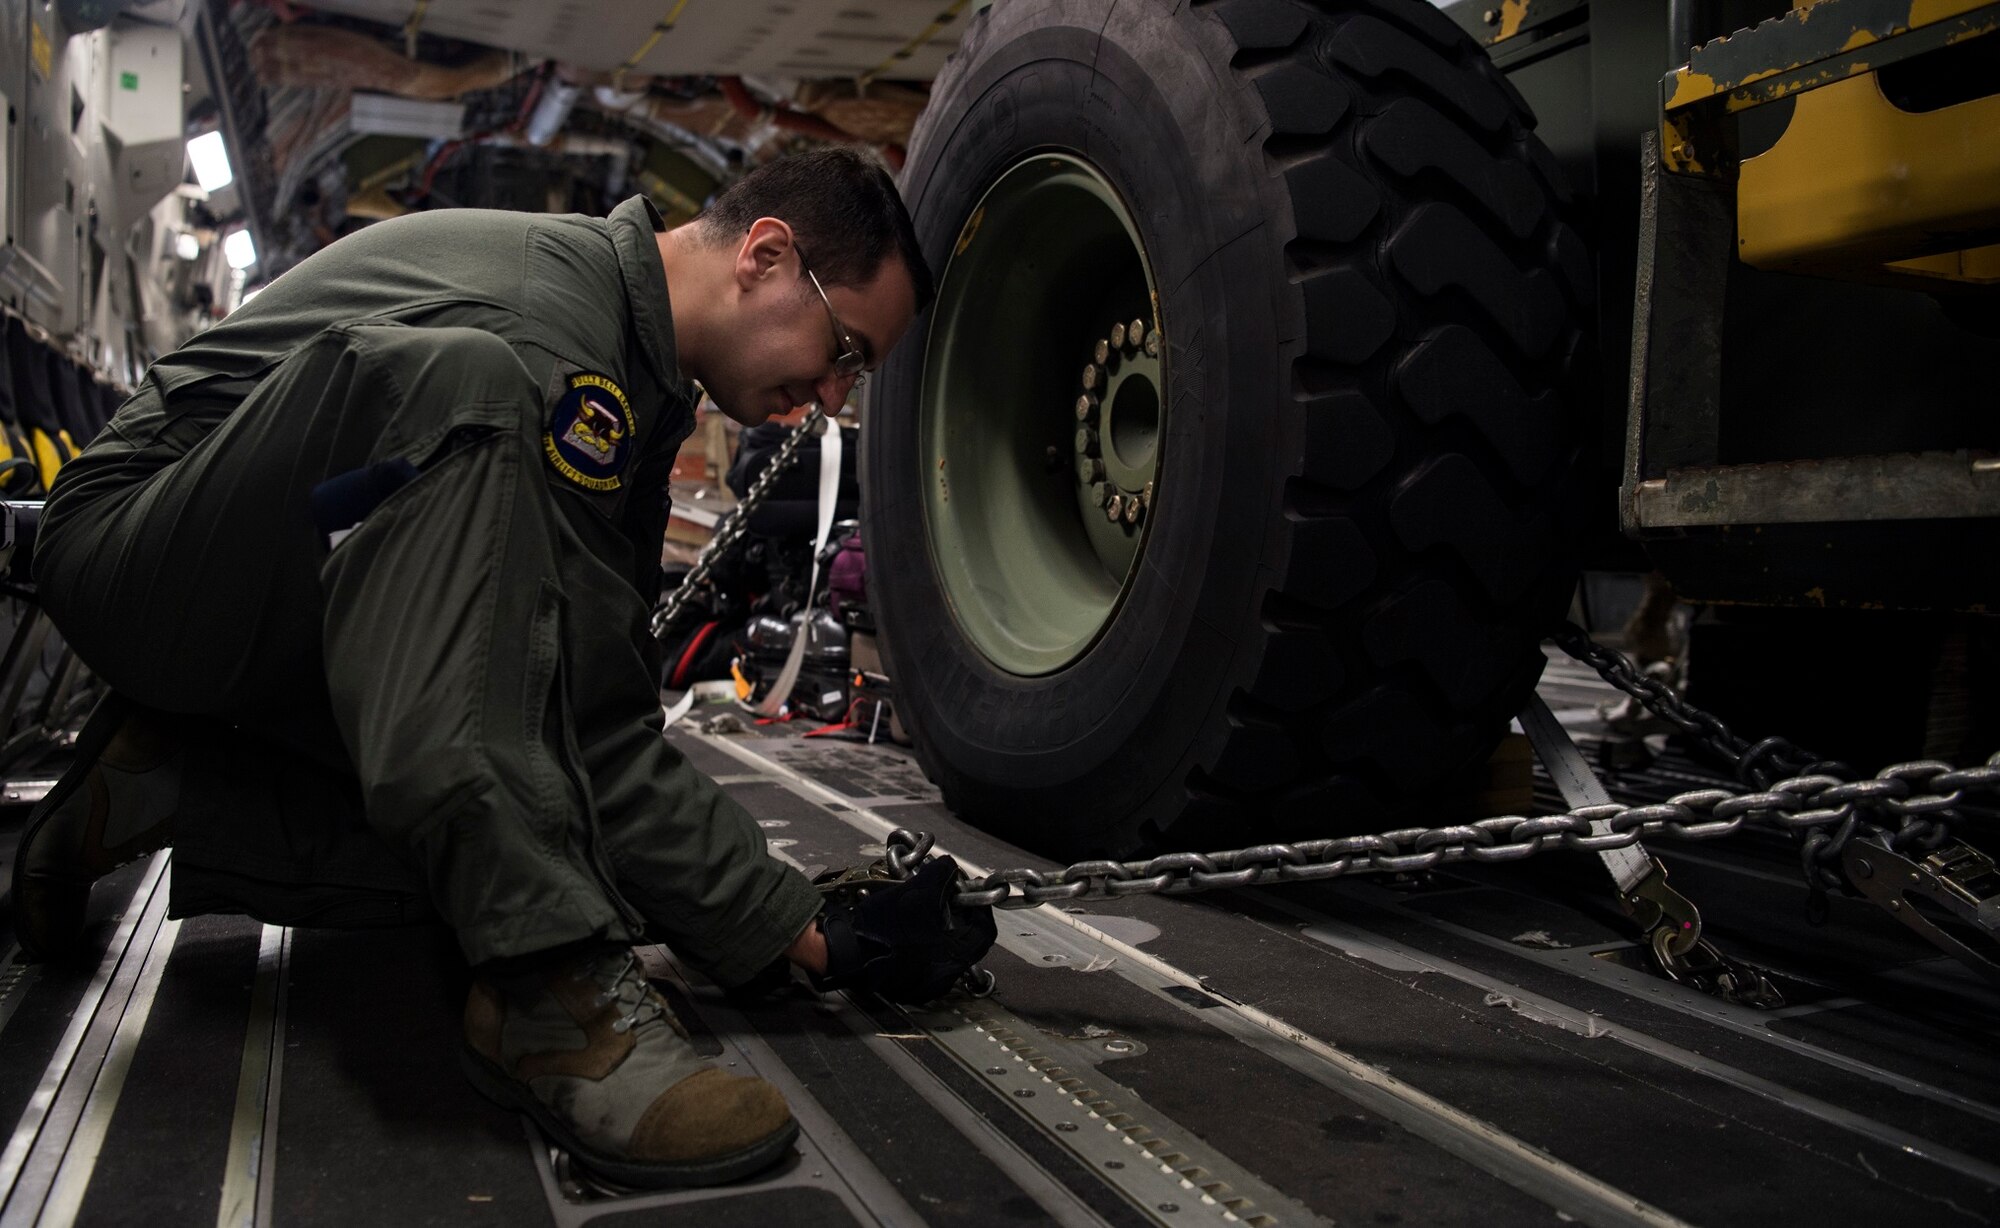 Capt. Andrew Shaffer, a C-17 Globemaster III pilot with the 6th Airlift Squadron at Joint Base McGuire-Dix-Lakehurst, N.J., delivers humanitarian aid from Homestead Air Reserve Base, Fla., to Cucuta, Colombia, Feb. 16, 2019. The role of the U.S. military during this peaceful mission is to transport urgently needed aid to Colombia for eventual distribution by relief organizations. (U.S. Air Force photo by Tech. Sgt. Gregory Brook)